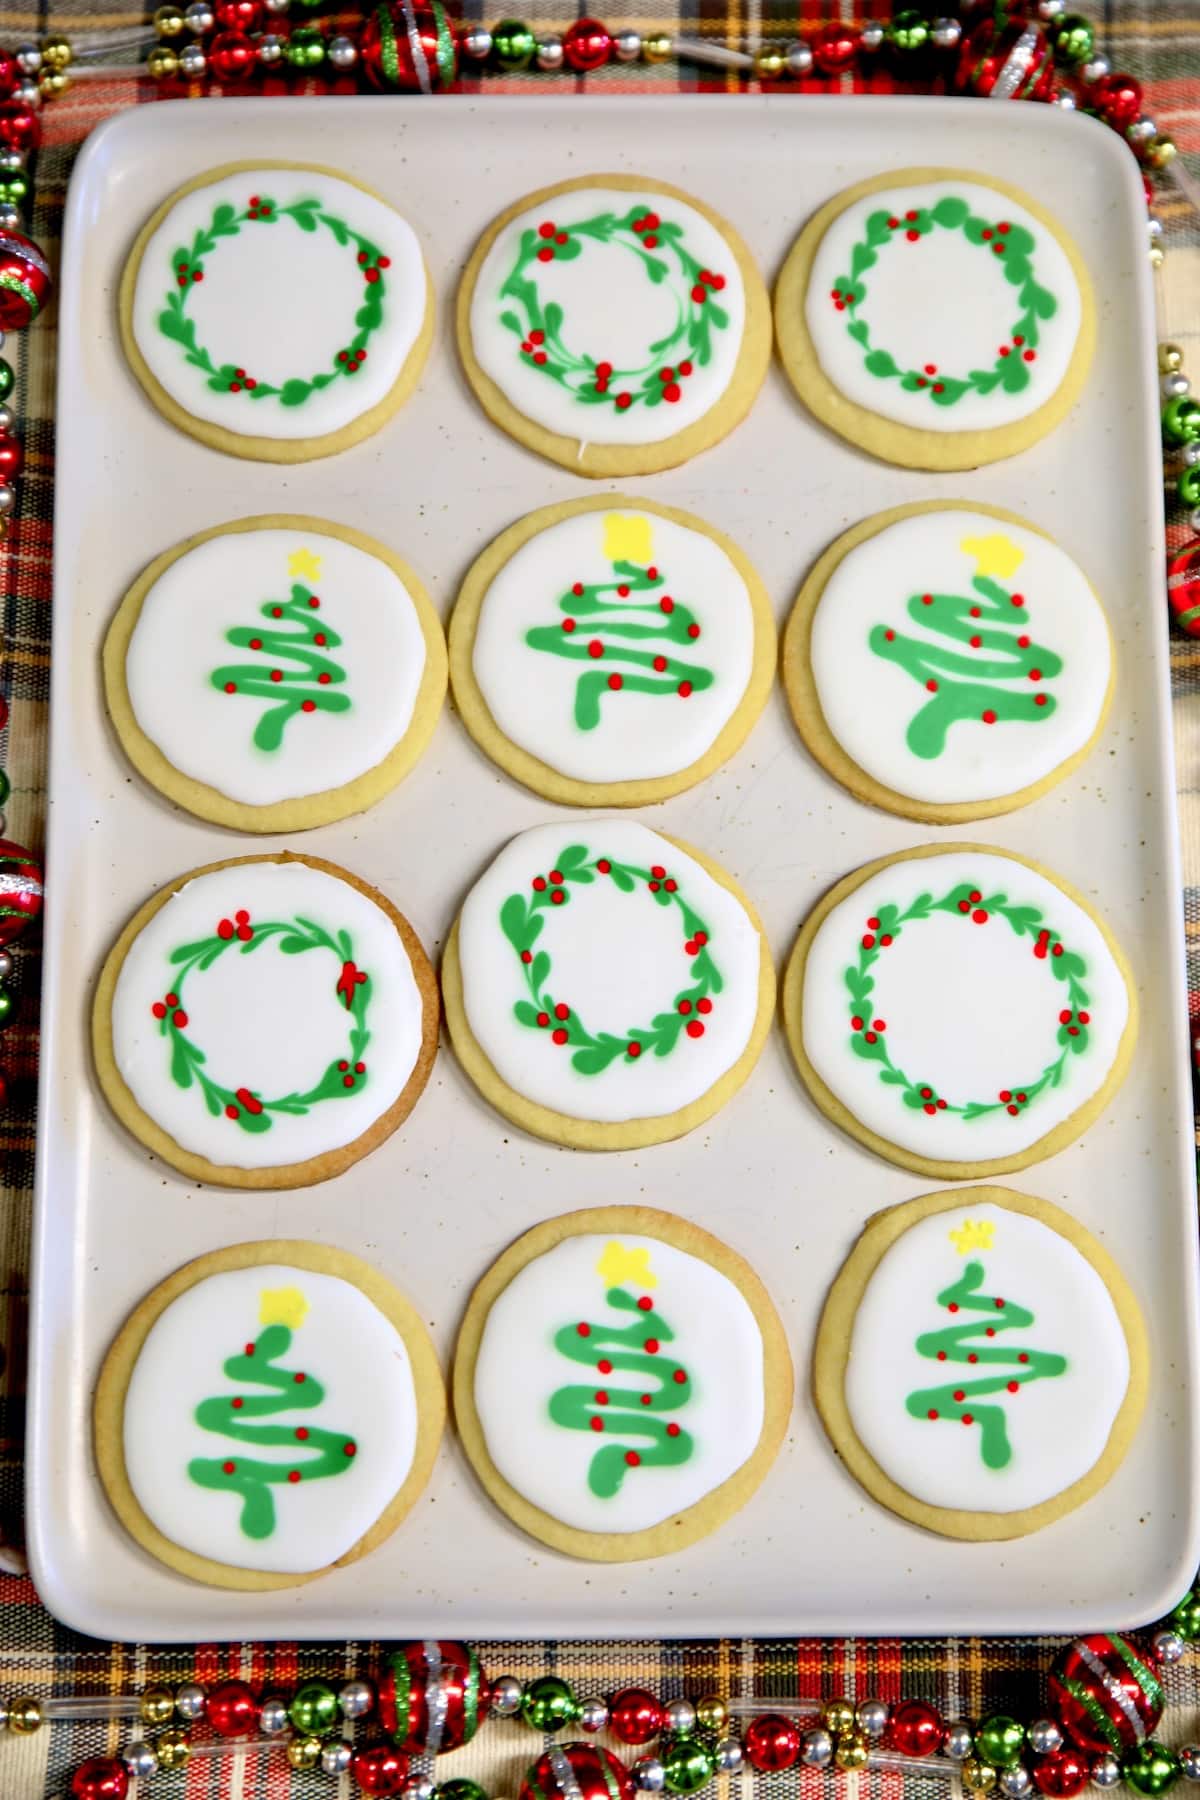 Platter of decorated iced sugar cookies.